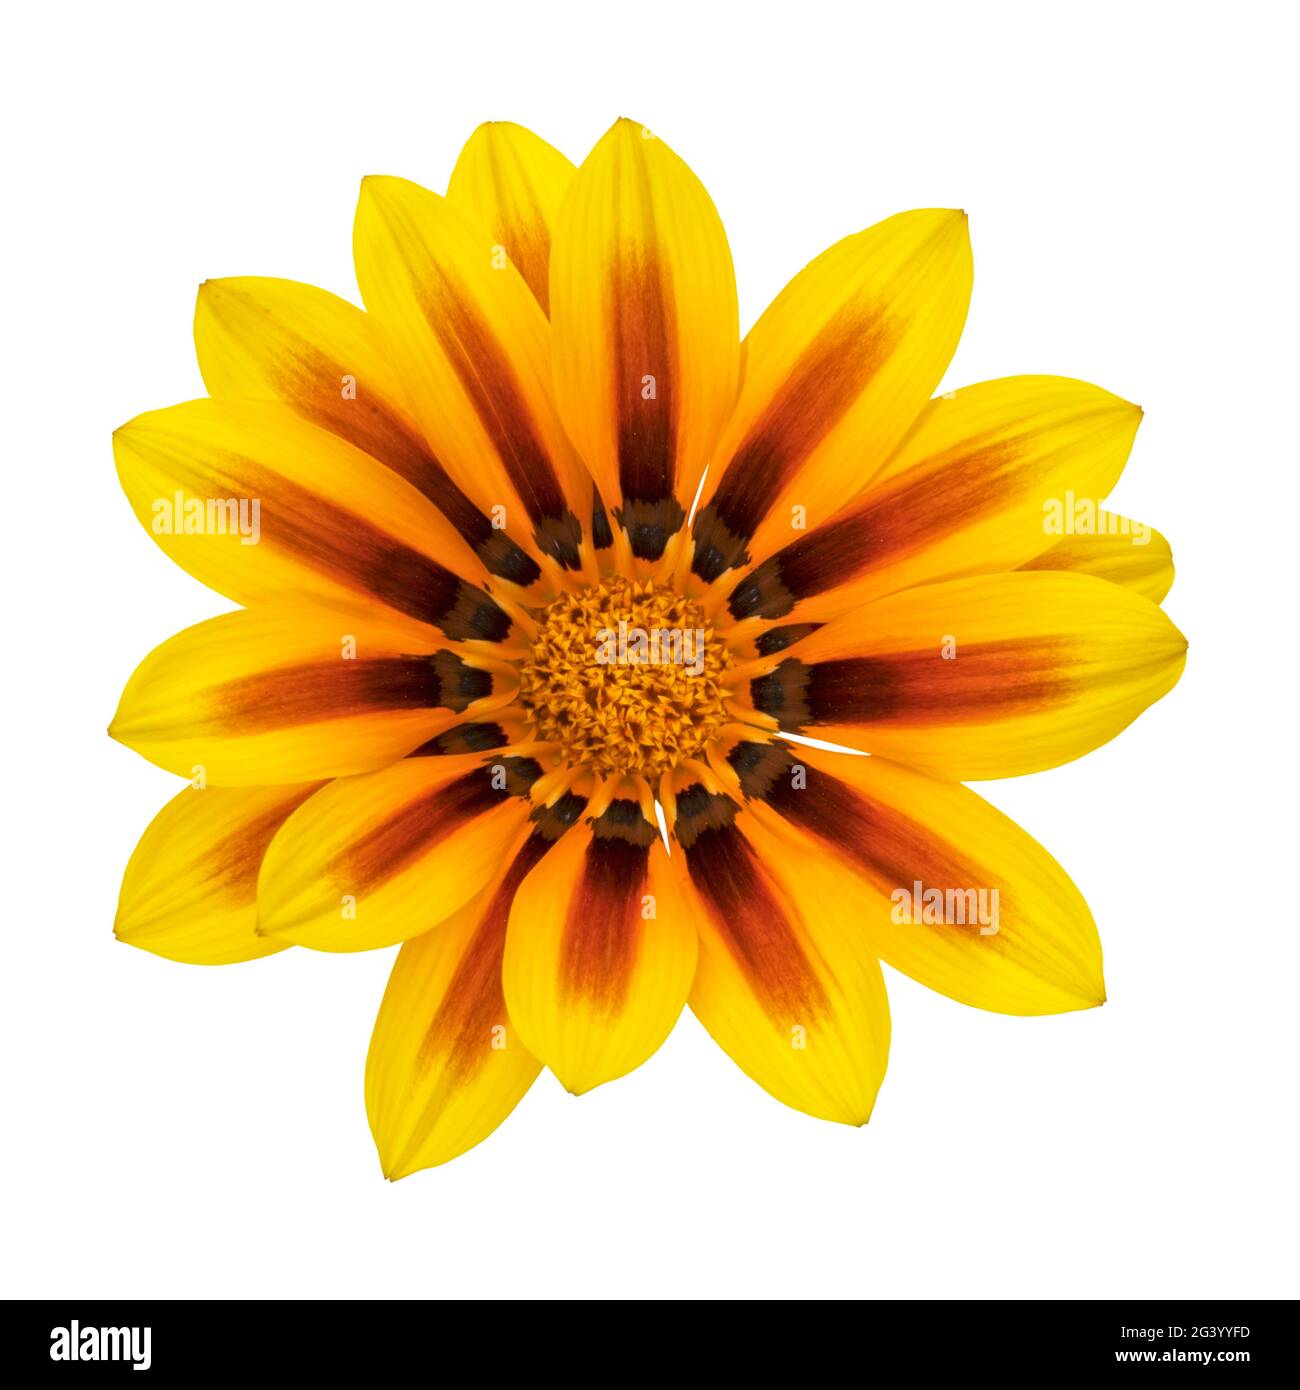 Yellow Gazania rigens flower head closeup, top view, isolated on white background Stock Photo